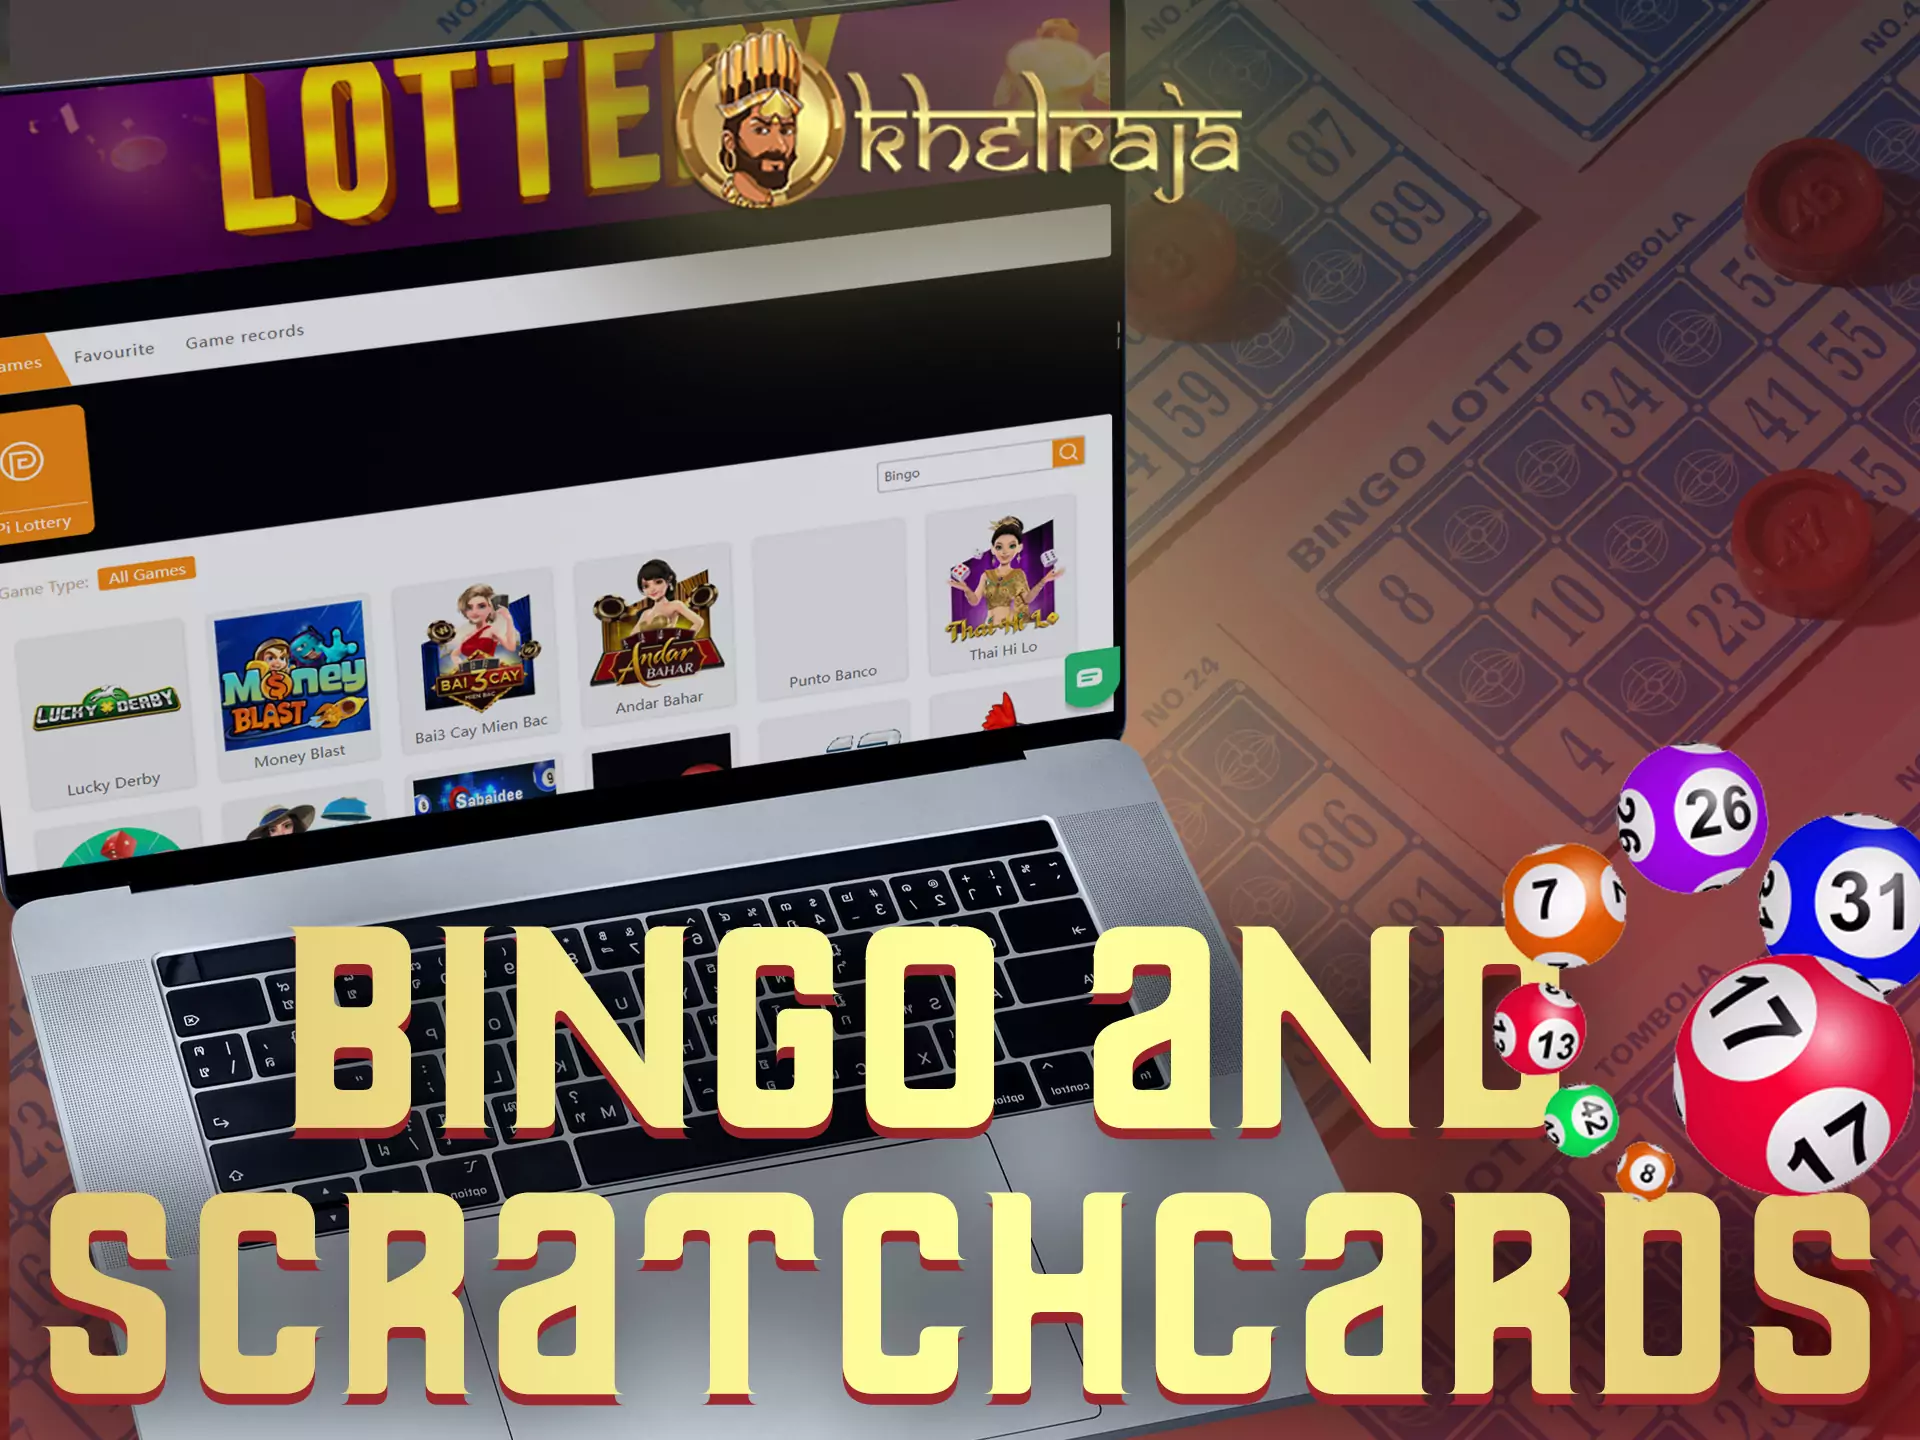 You can play bingo games or buy scratchcards on the Khelraja site.